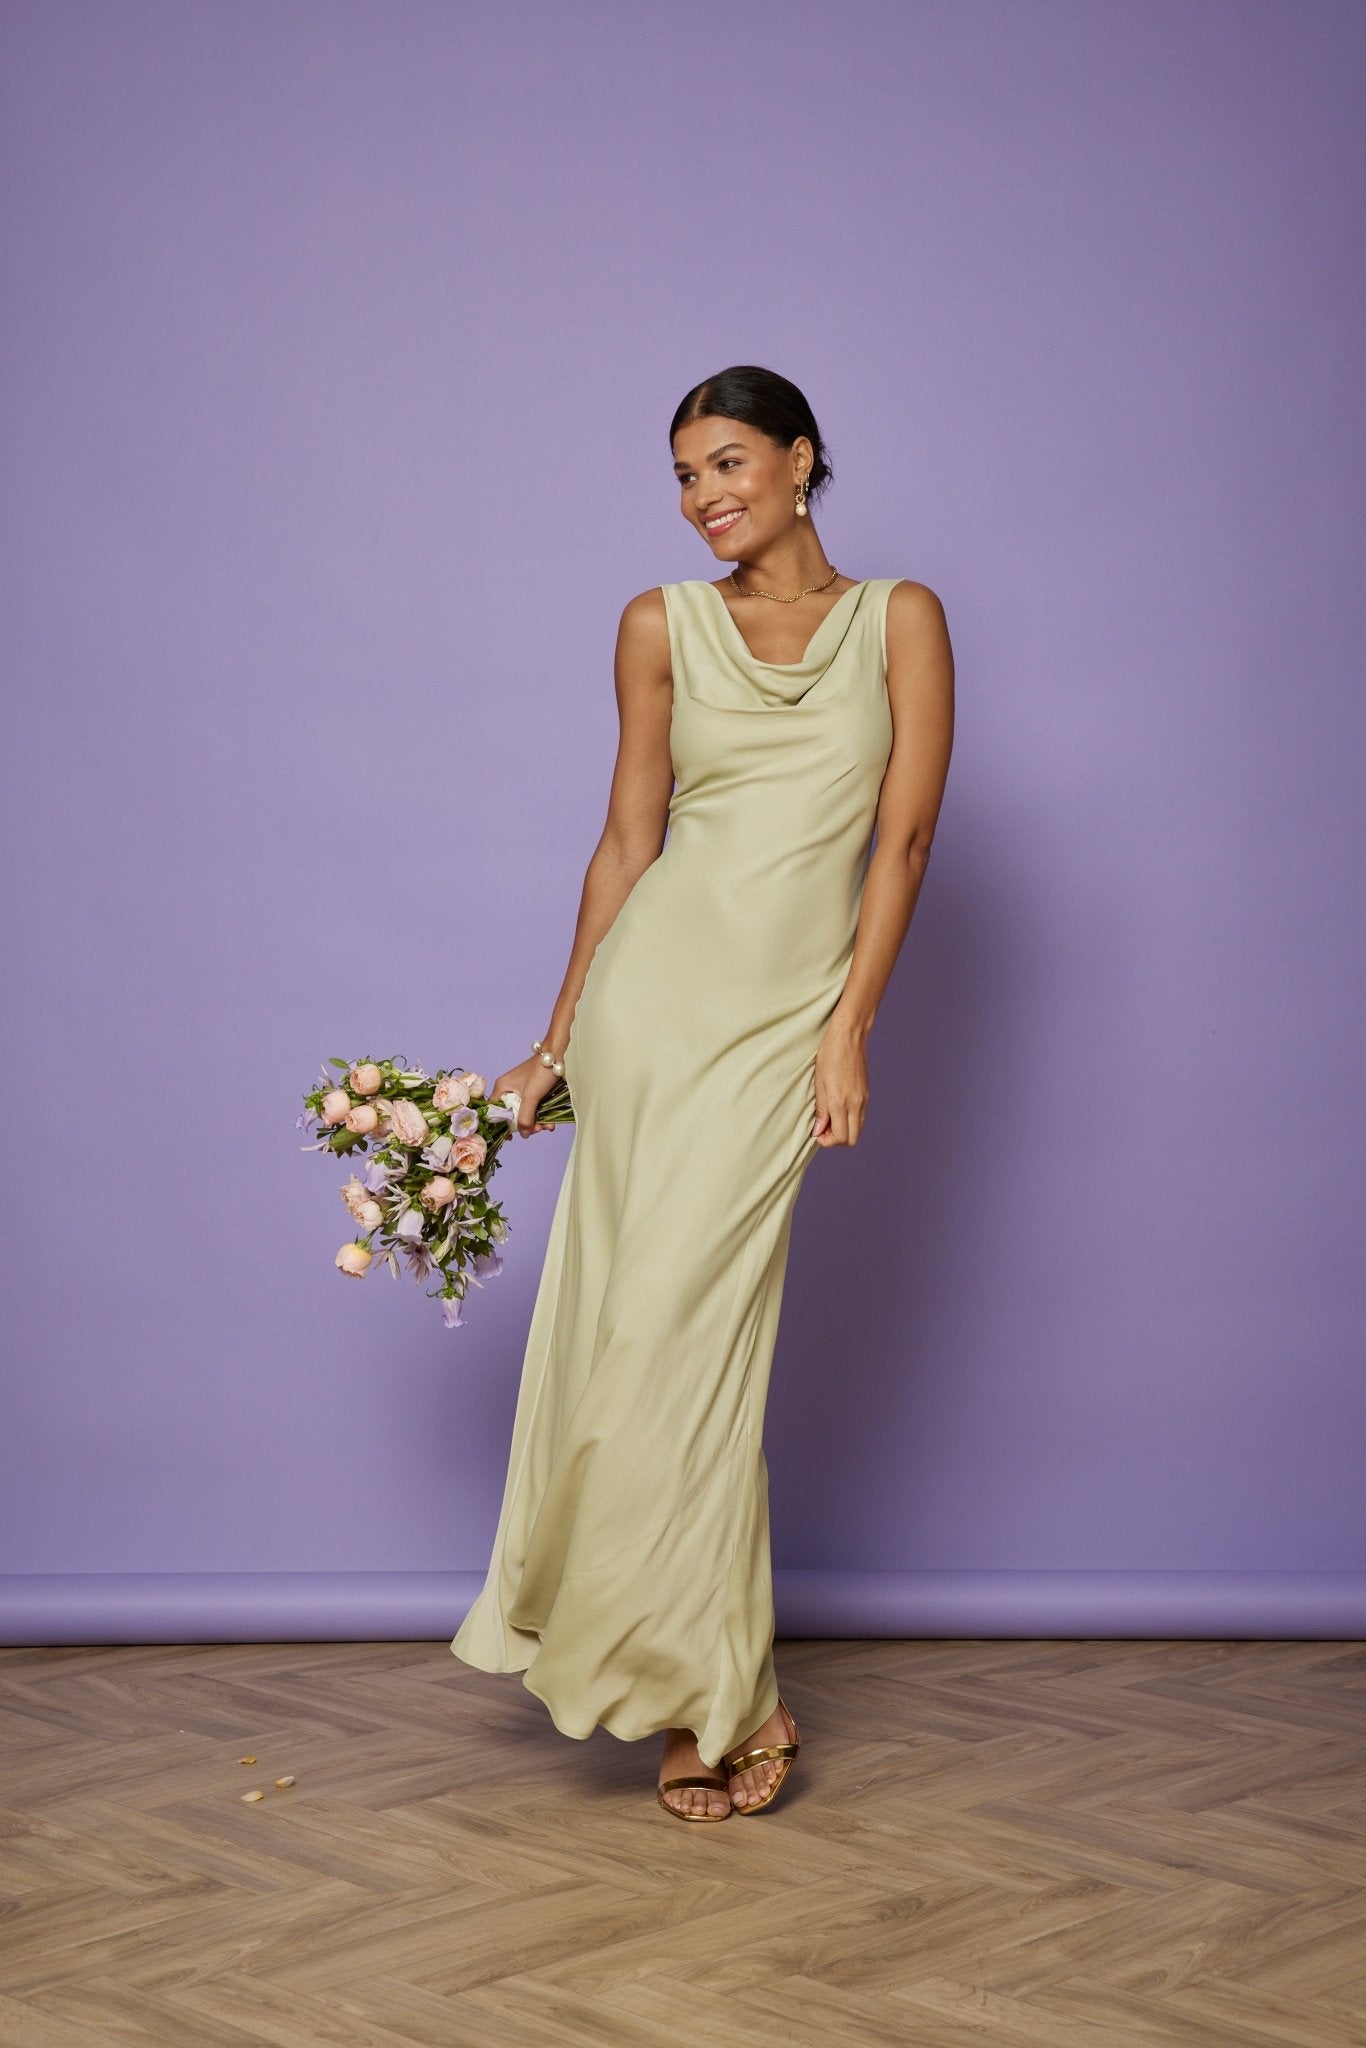 Pandy Satin Cowl Dress - Sage Green NEW - Maids to Measure